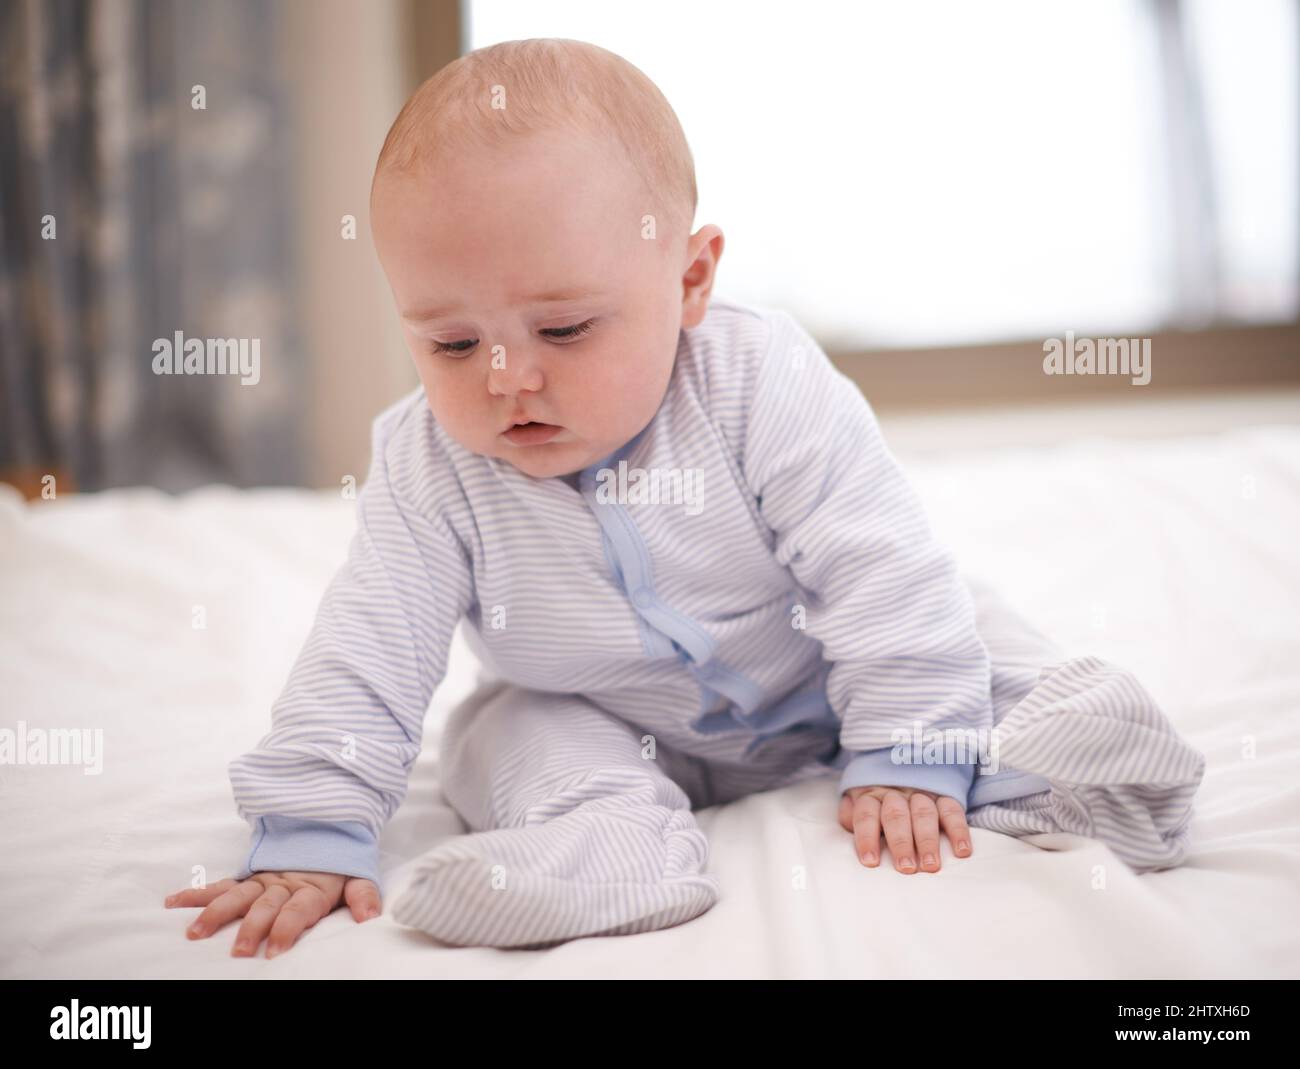 Such the curious one. Cropped shot of an adorable baby boy. Stock Photo